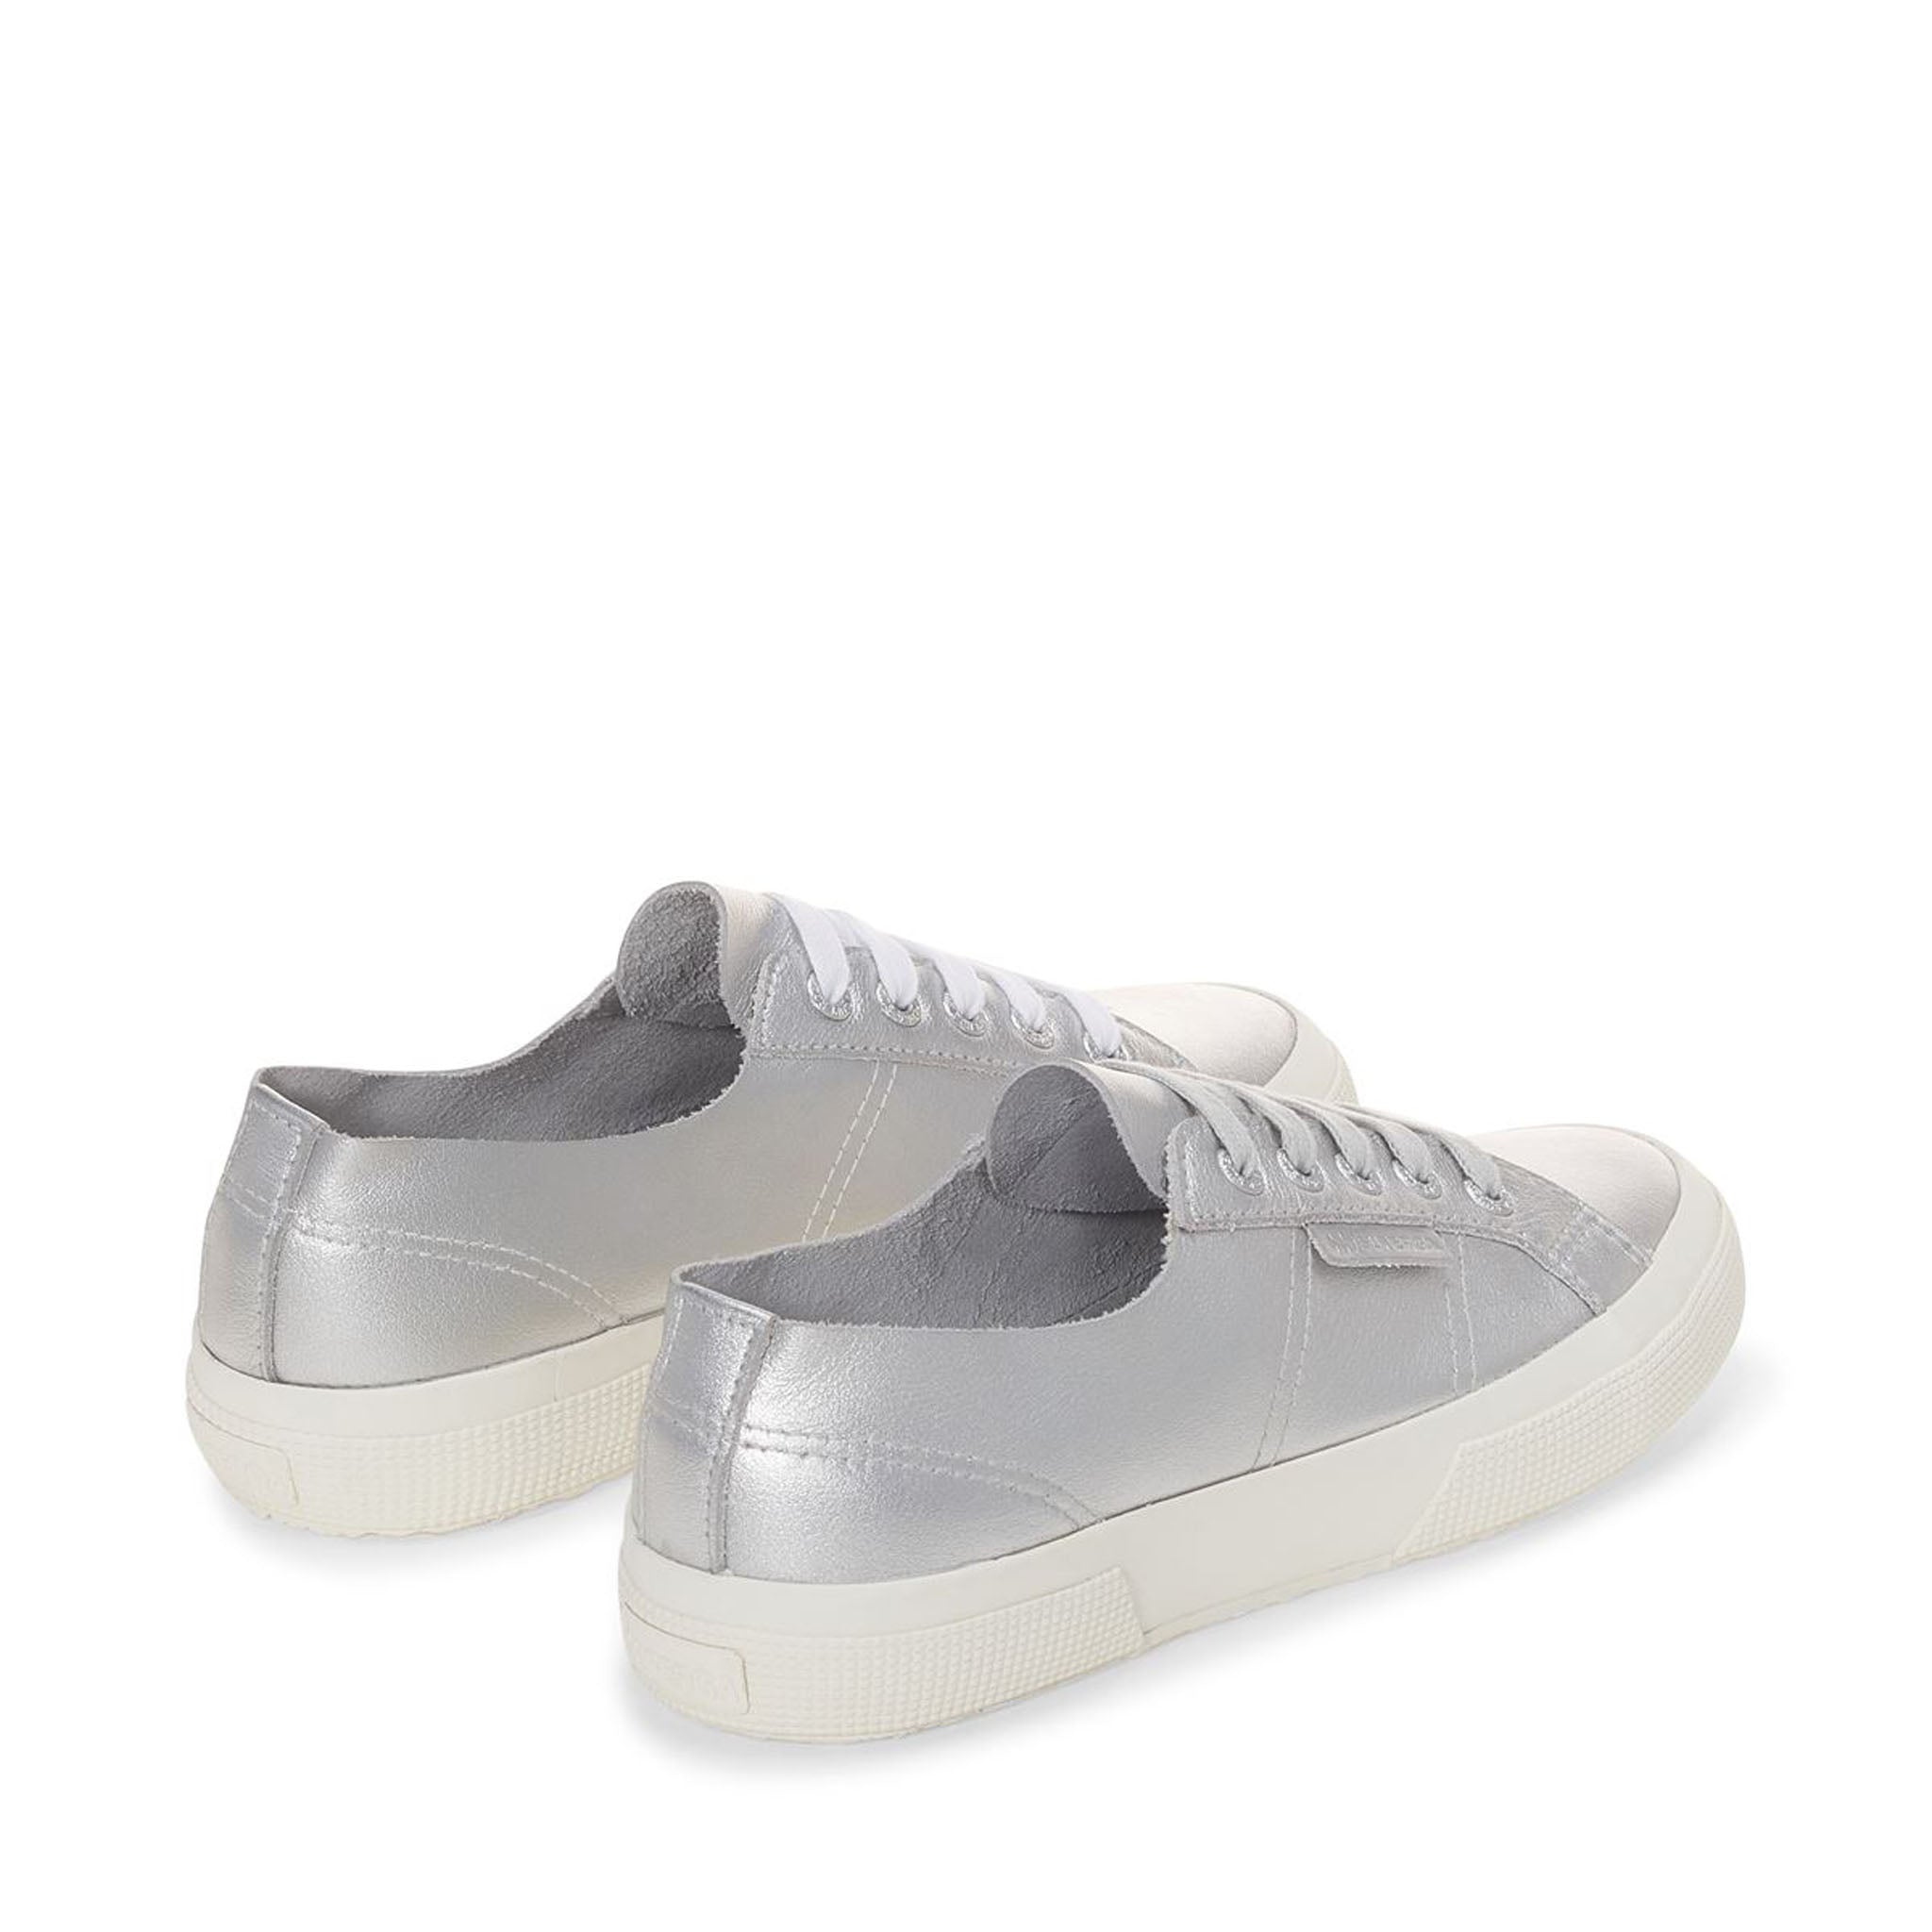 SUPERGA sneakers 2730 Silver for girls | NICKIS.com